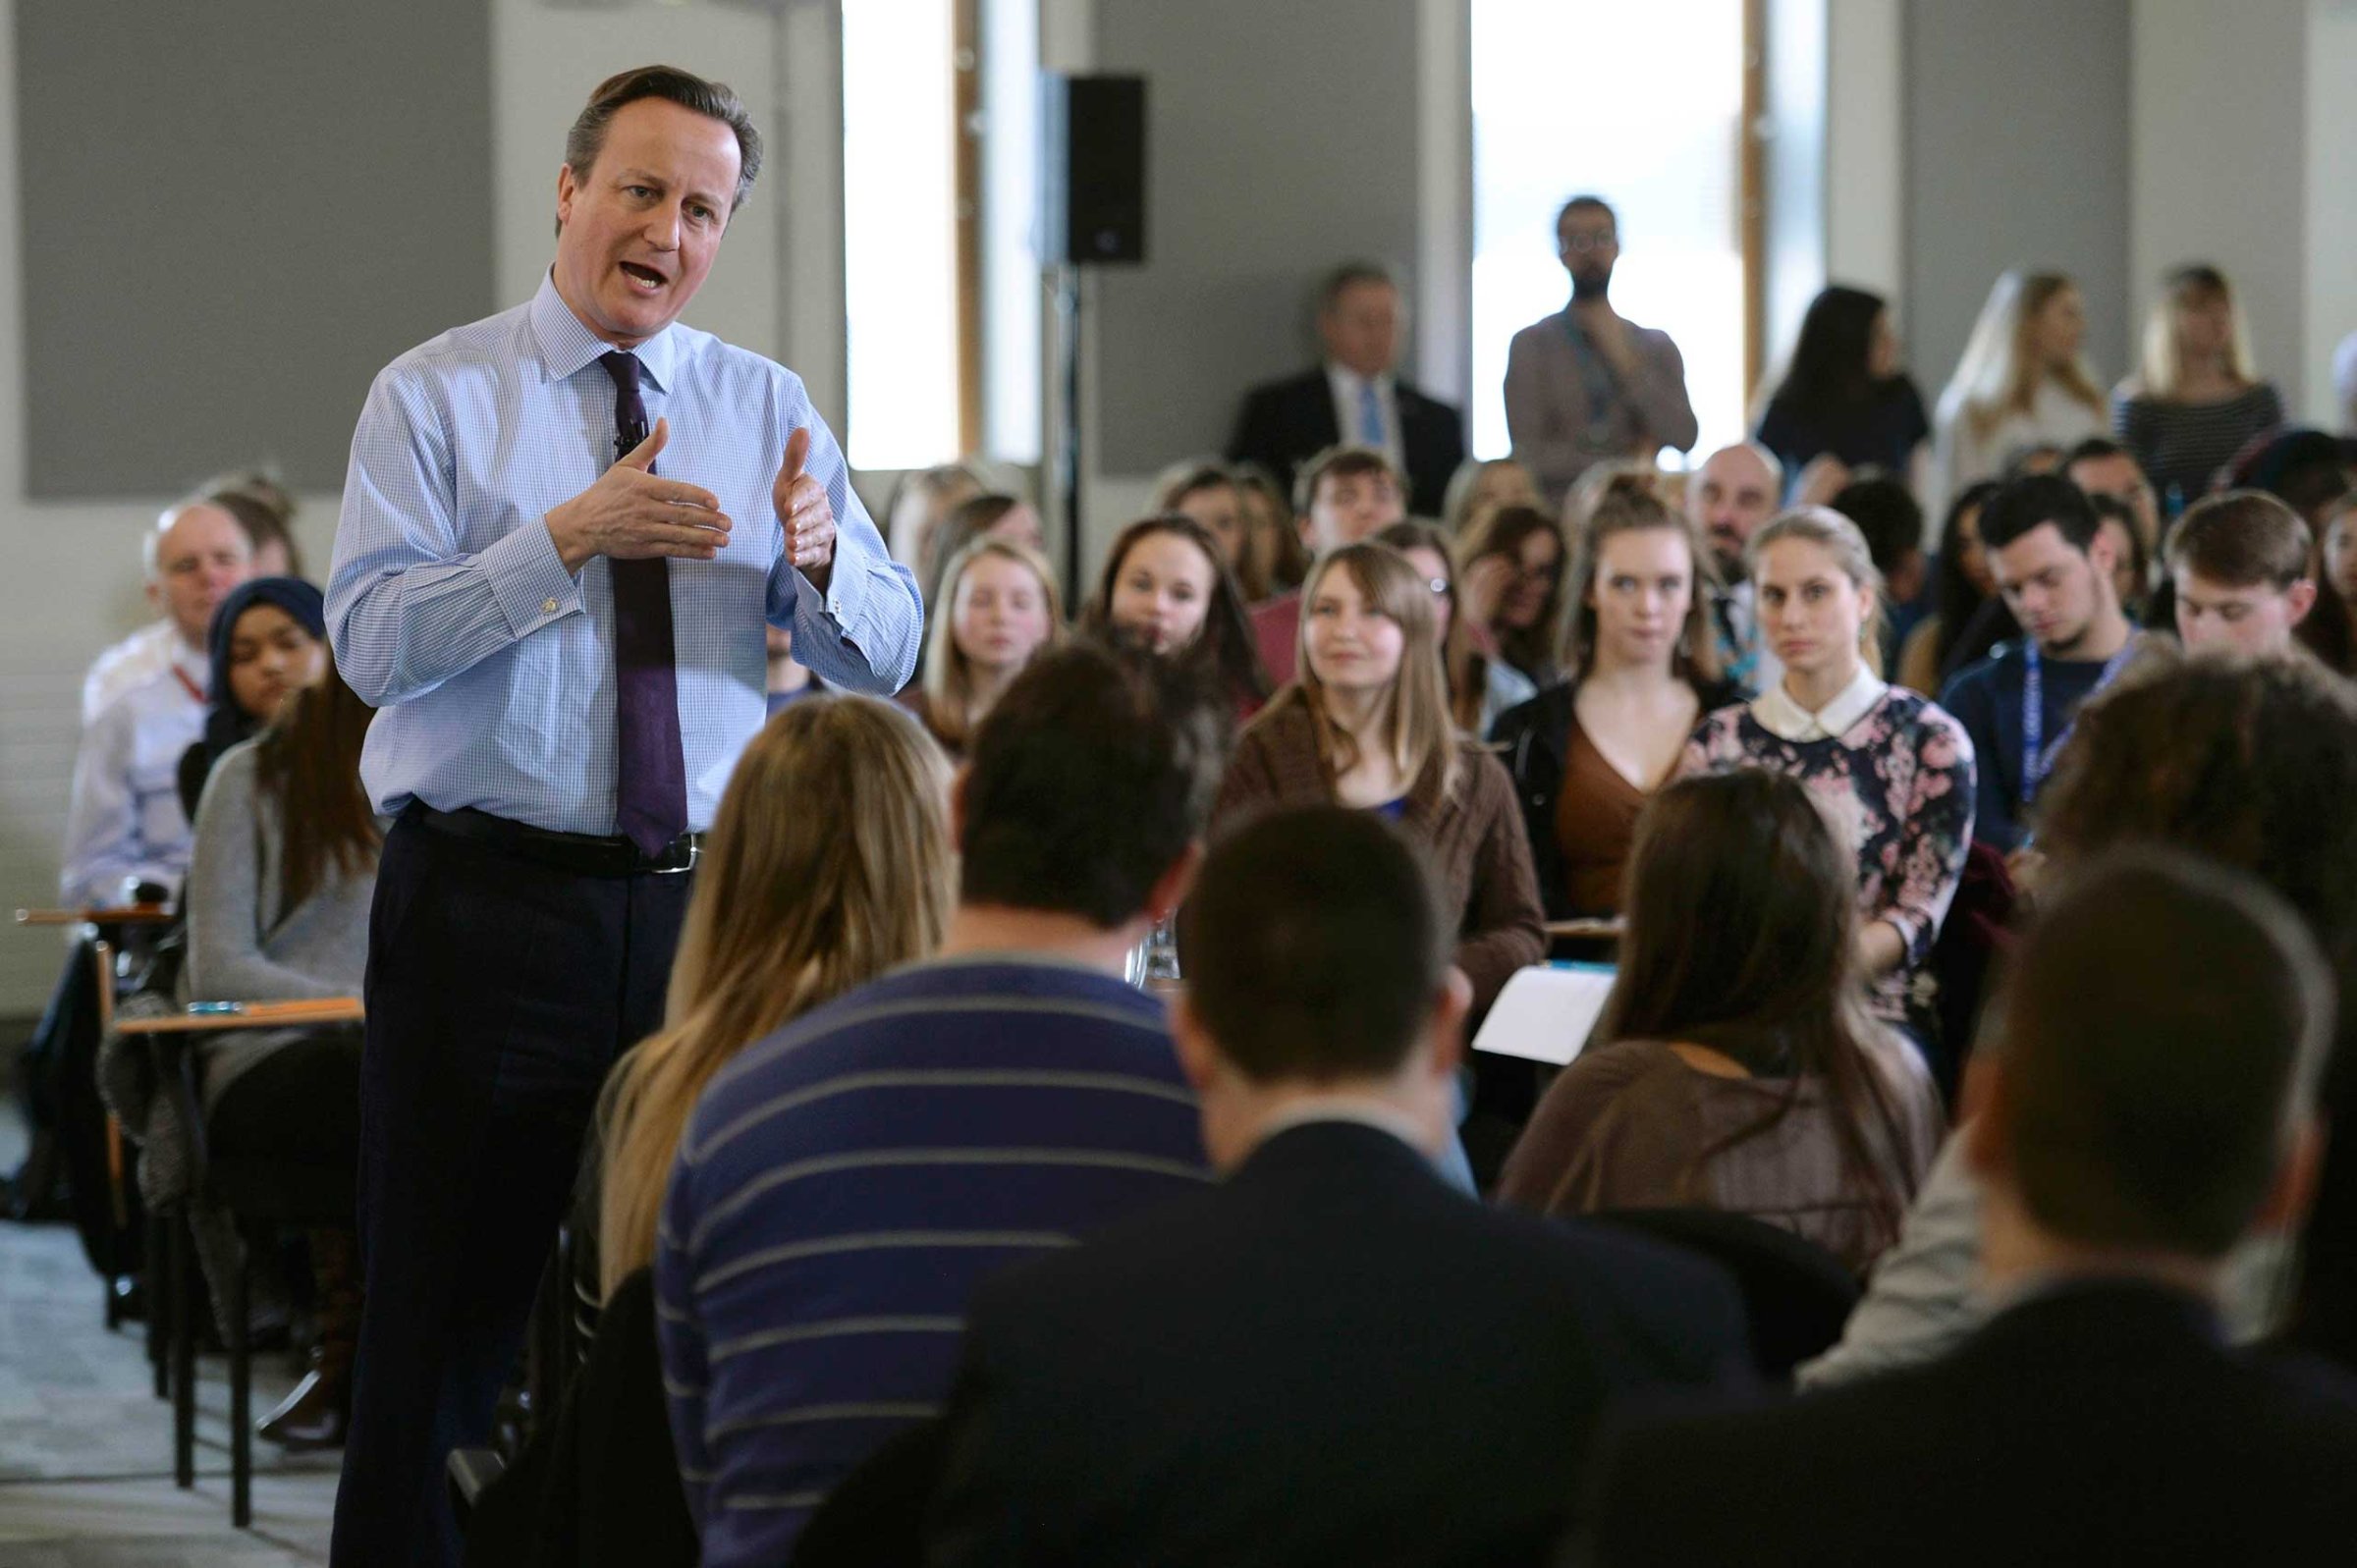 British Prime Minister David Cameron holds a question and answer session with students at University Campus Suffolk in Ipswich, Britain Feb. 29, 2016.